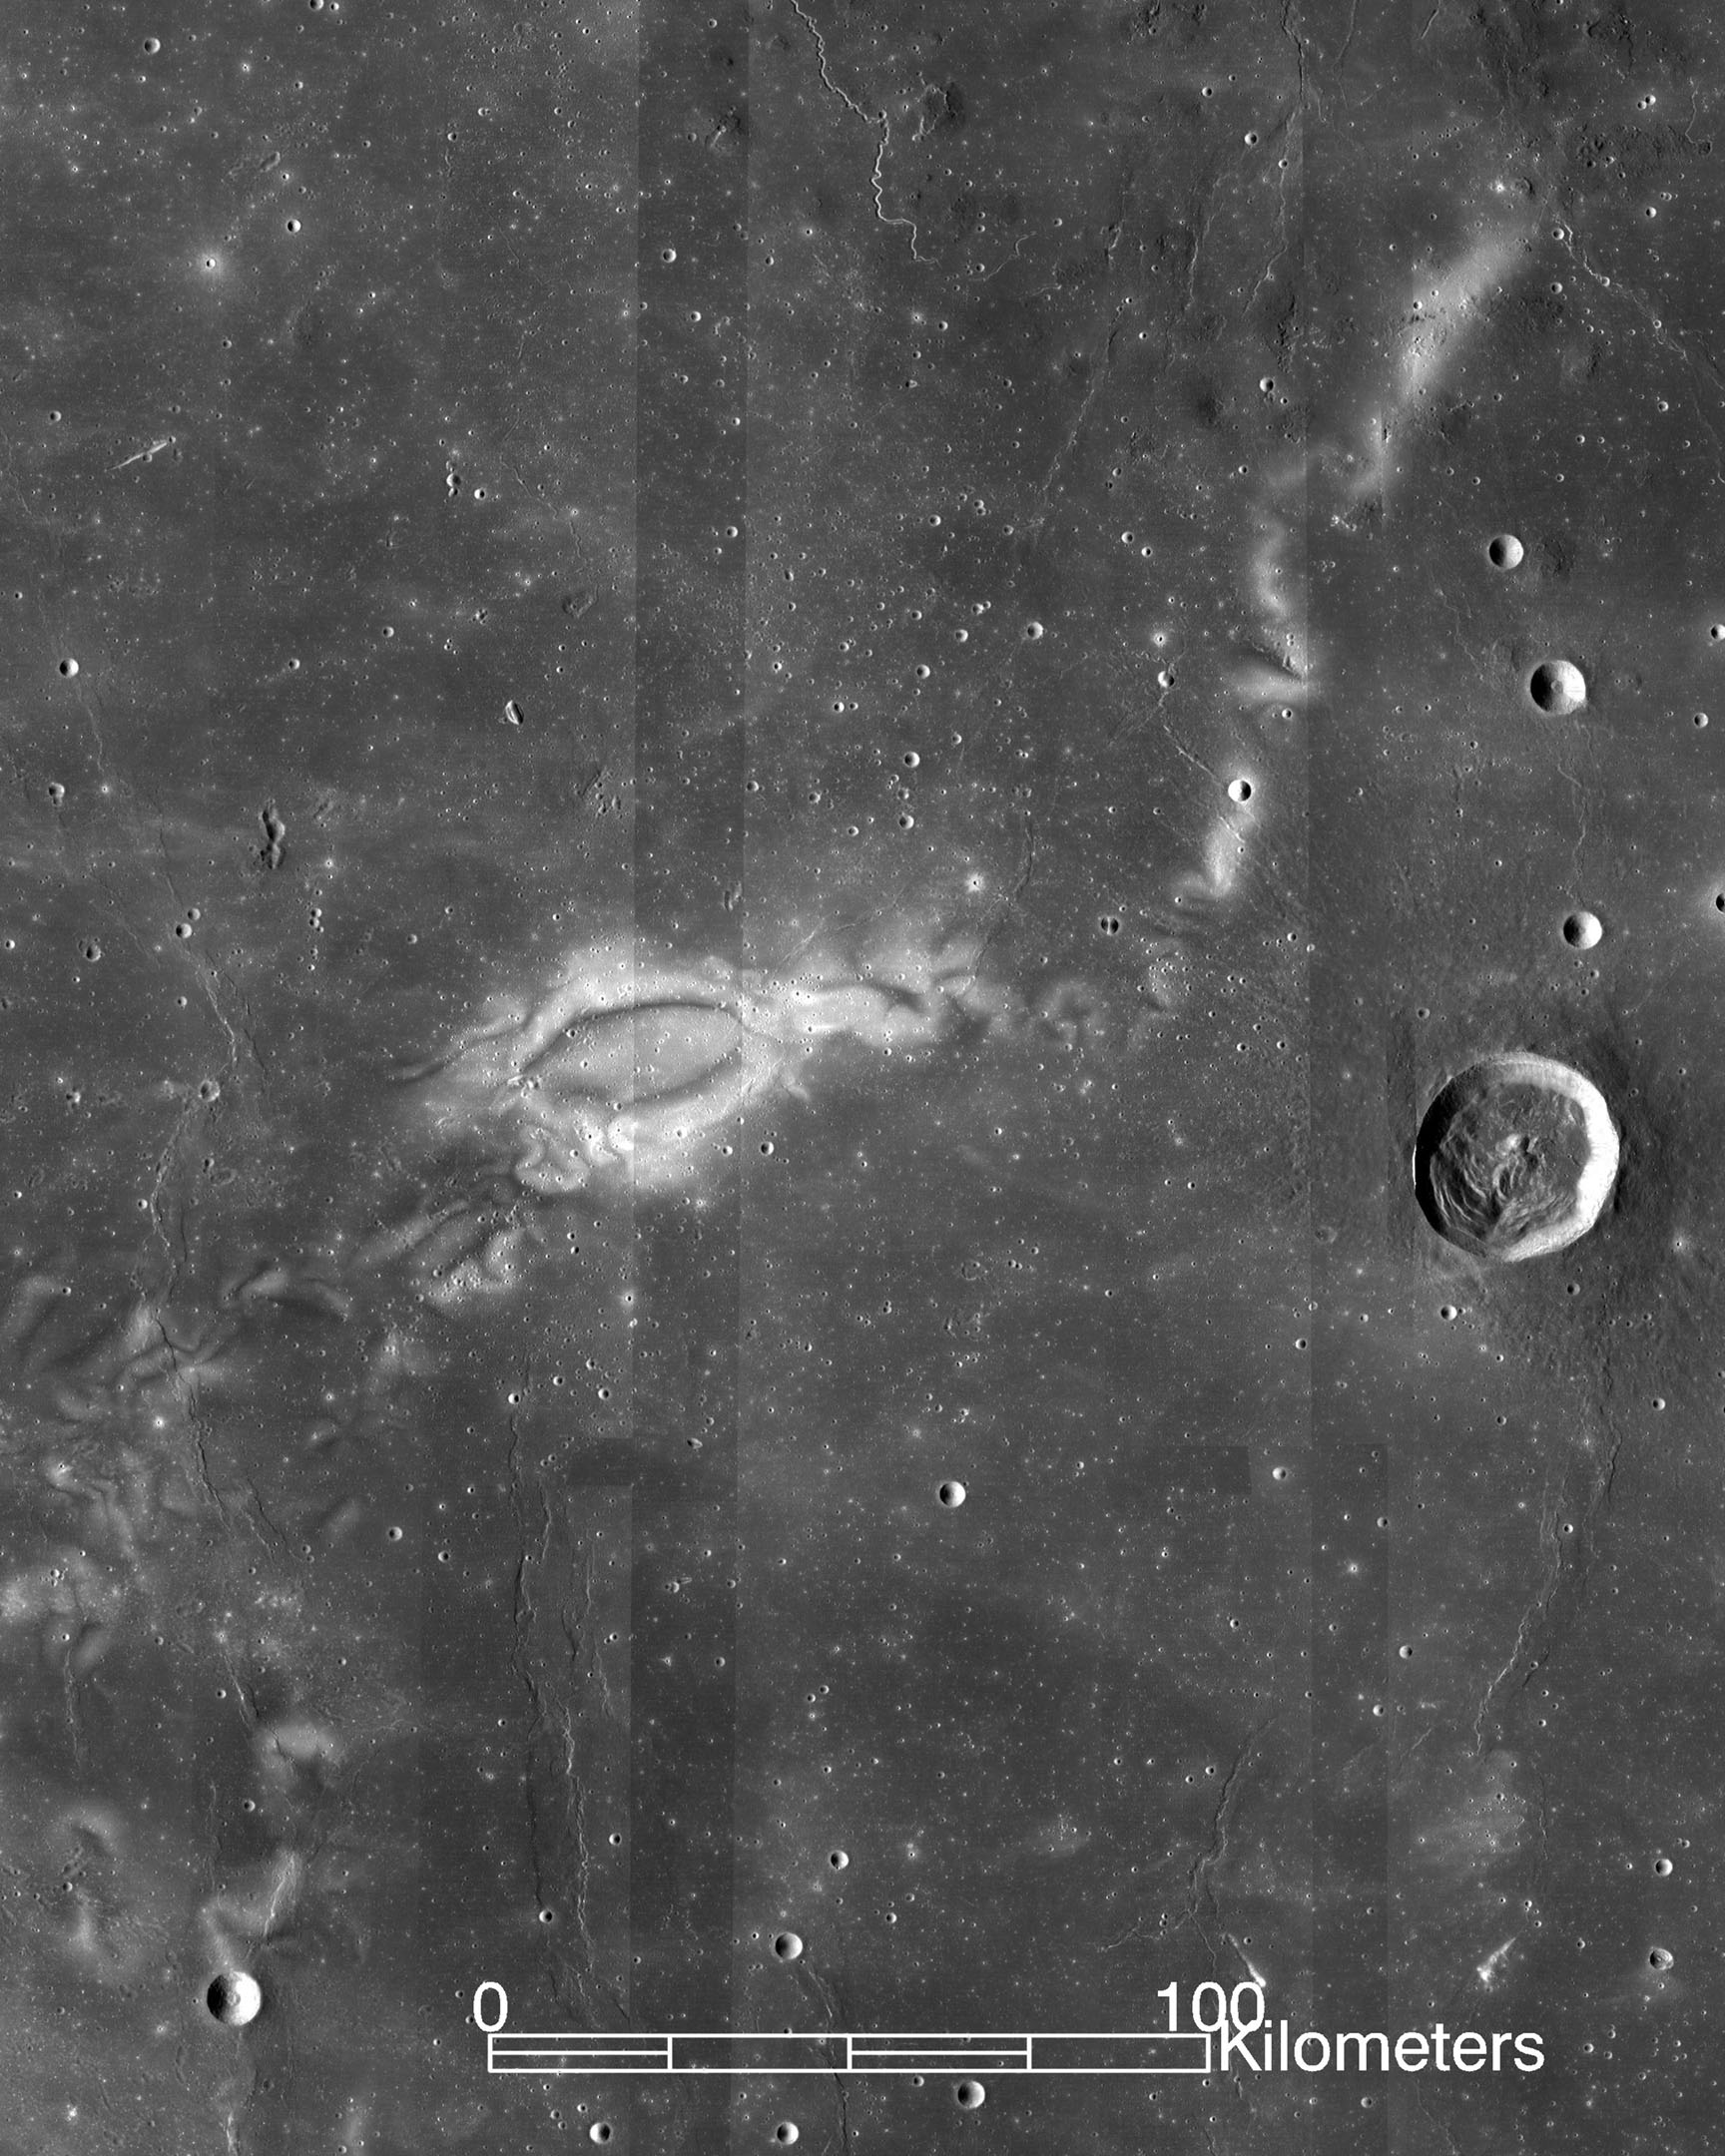 Photo of the Moon's surface with swirls